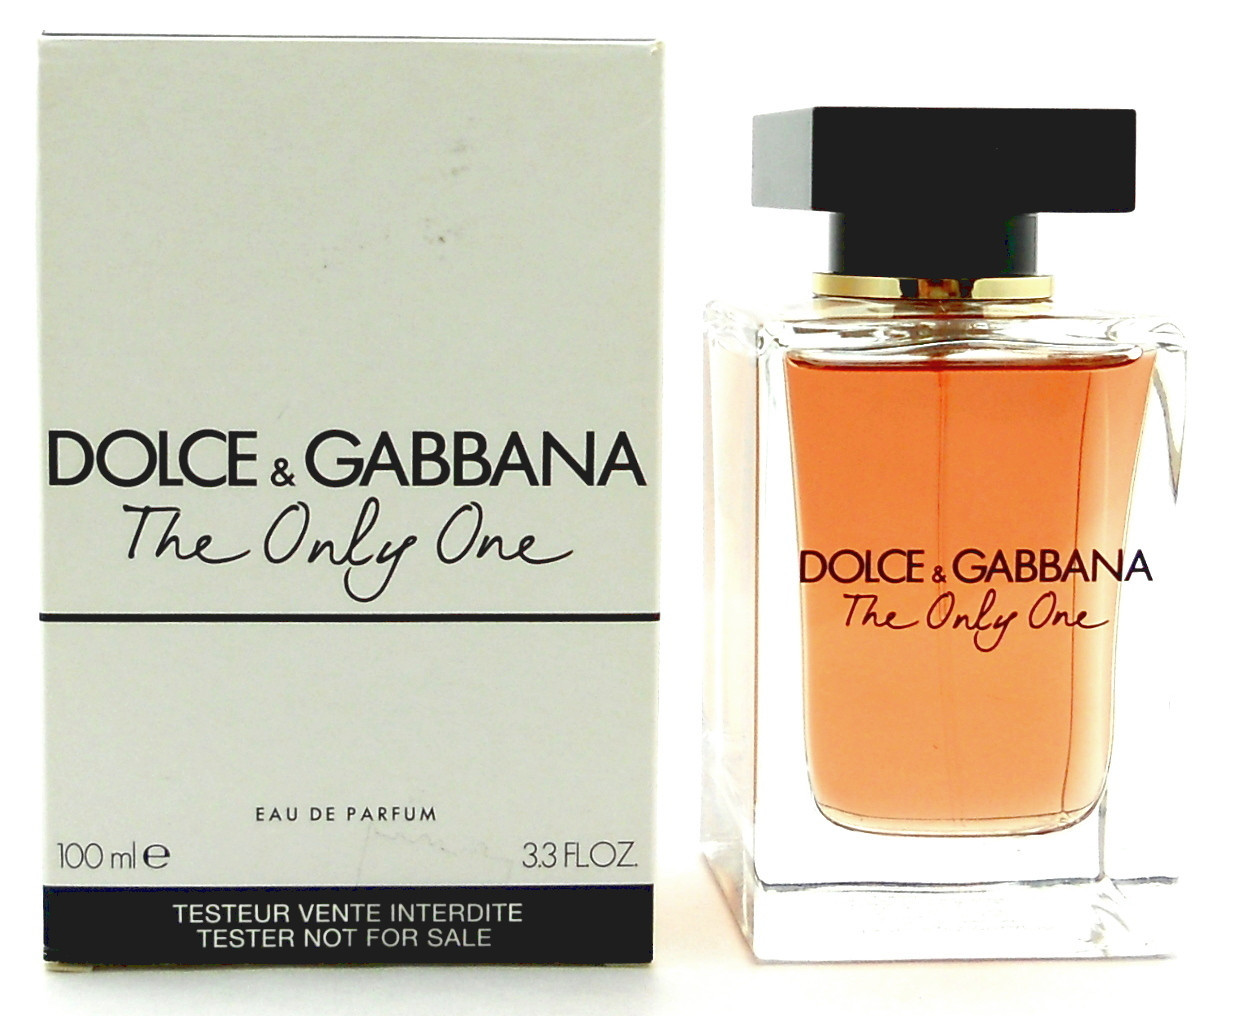 Dolce & Gabbana The only one edp tester 100ml